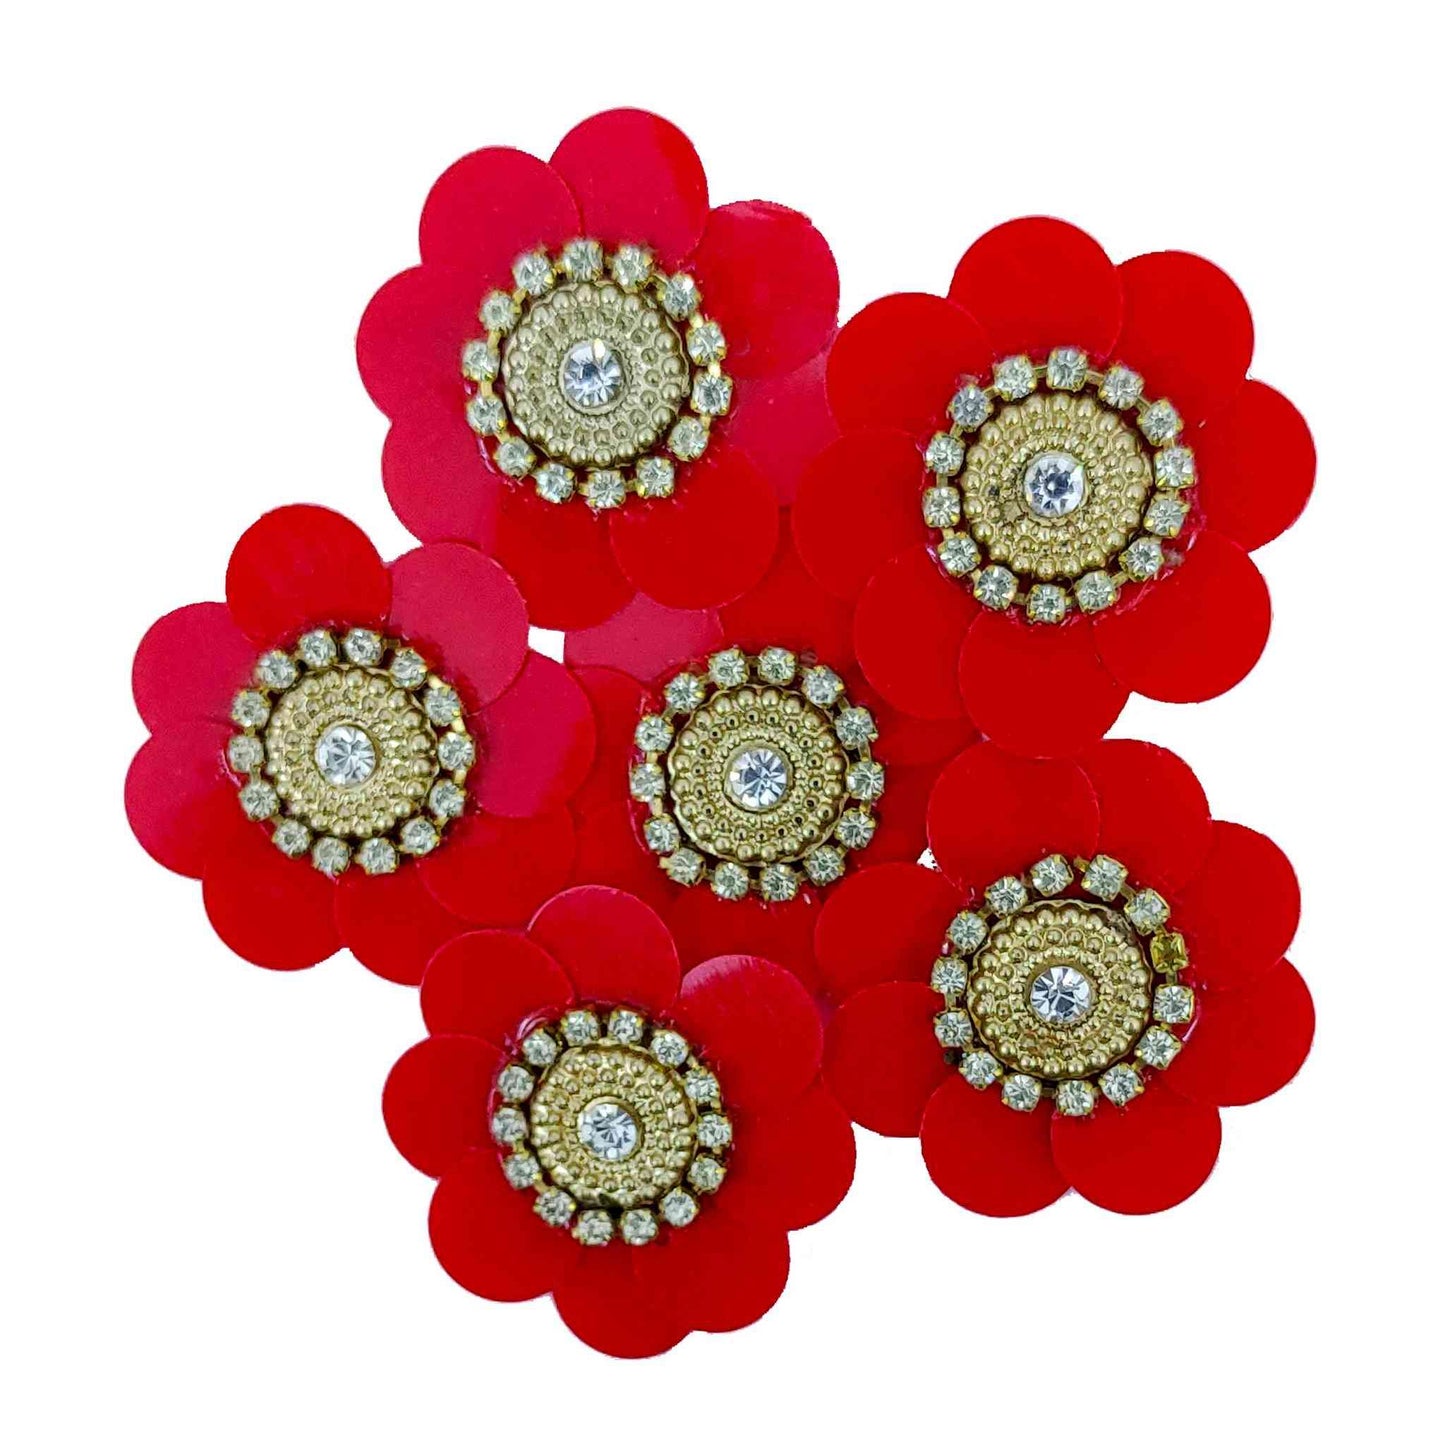 Indian Petals Sequence work Floral Buti for DIY Craft, Trouseau Packing or Decoration (Bunch of 12) - Design 206, Red - Indian Petals